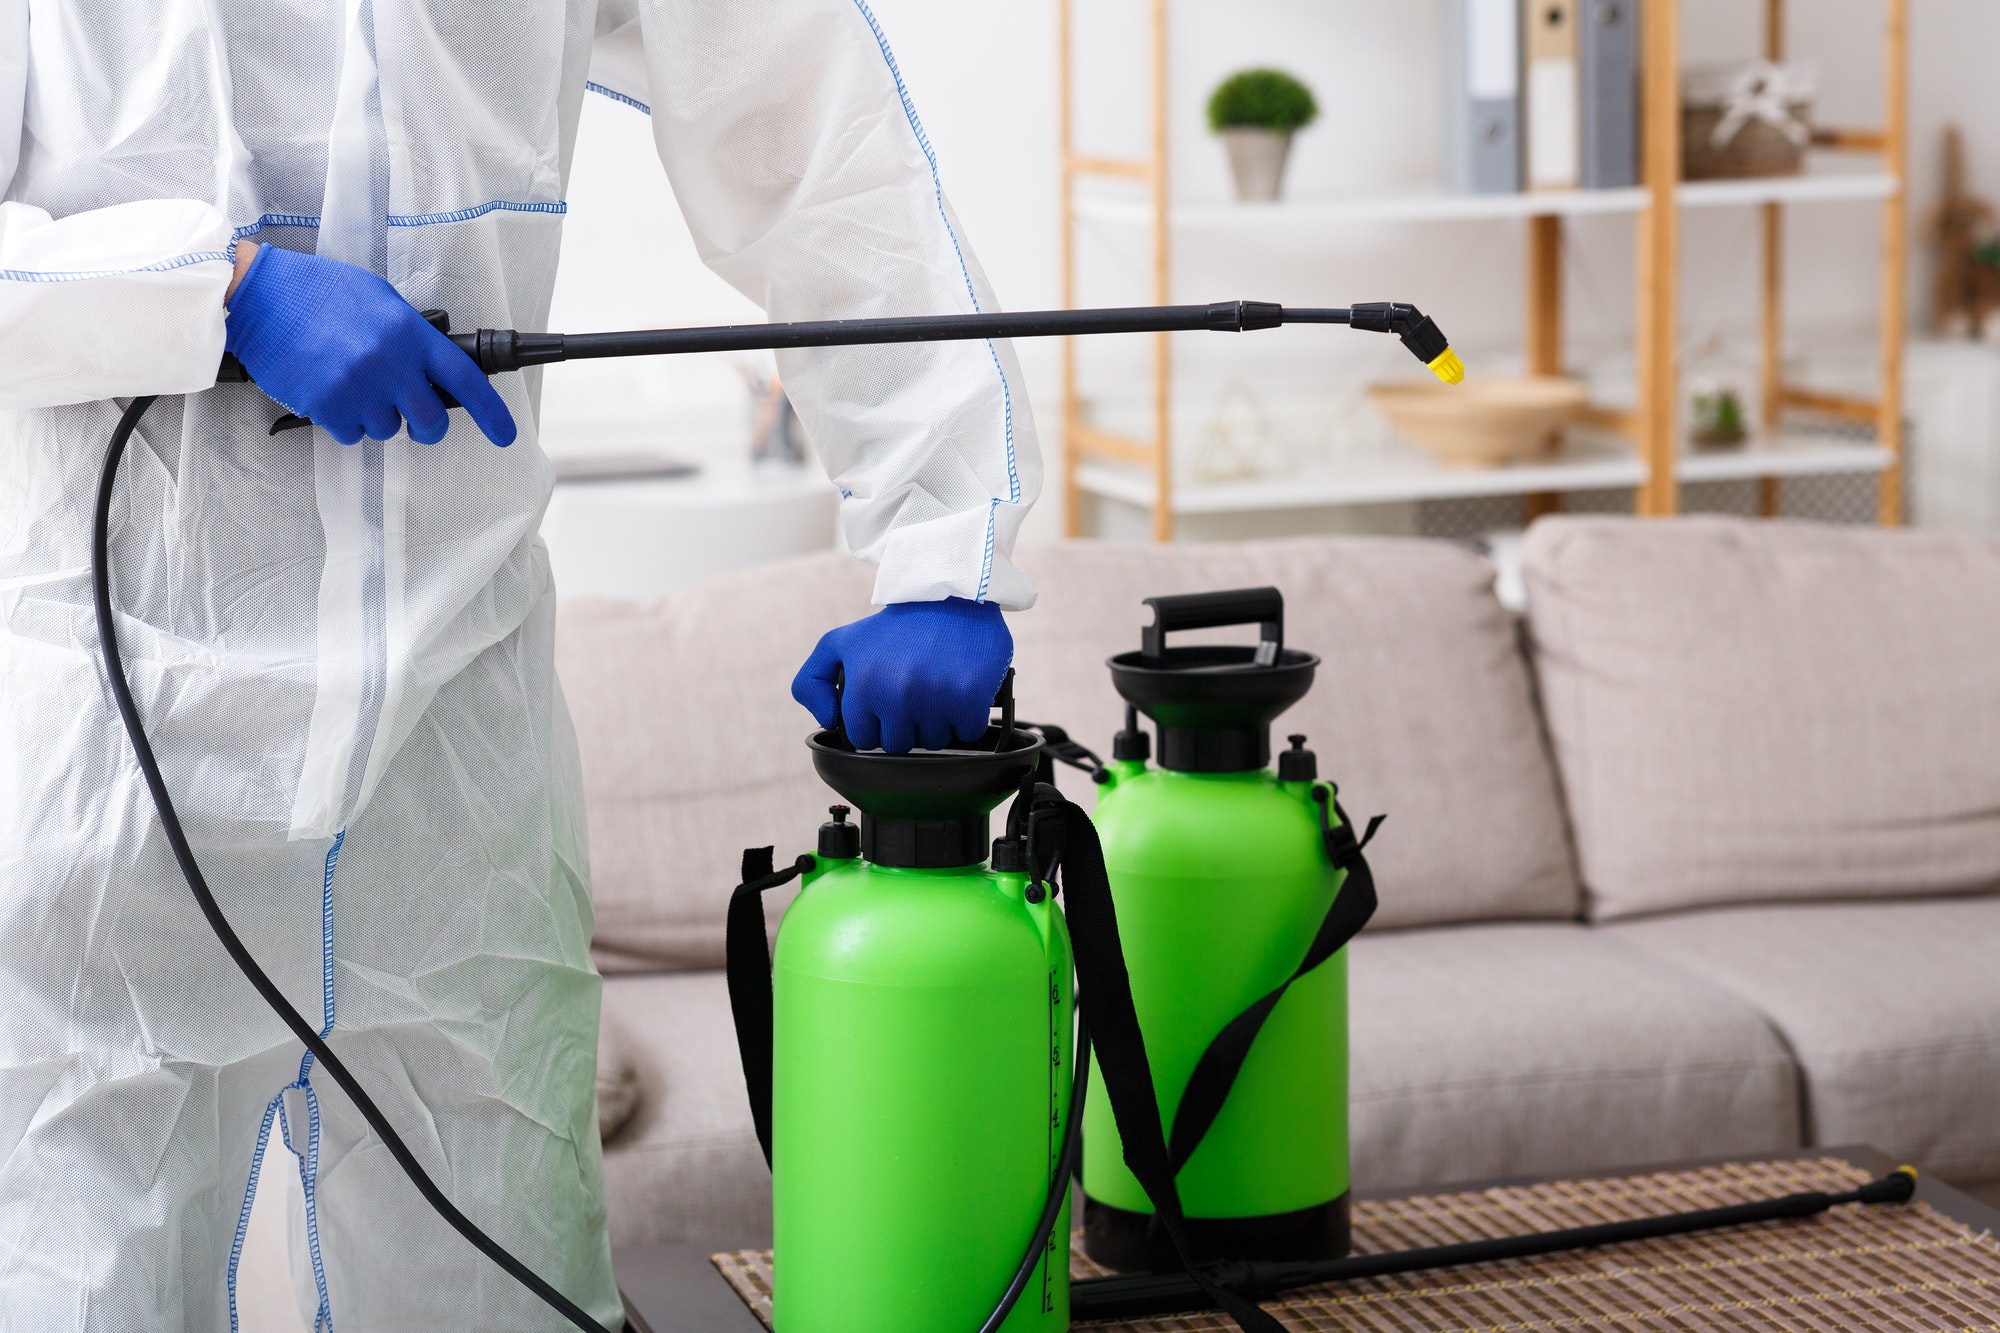 unrecognizable-person-disinfecting-home-sofa-with-cleaning-spray.jpg